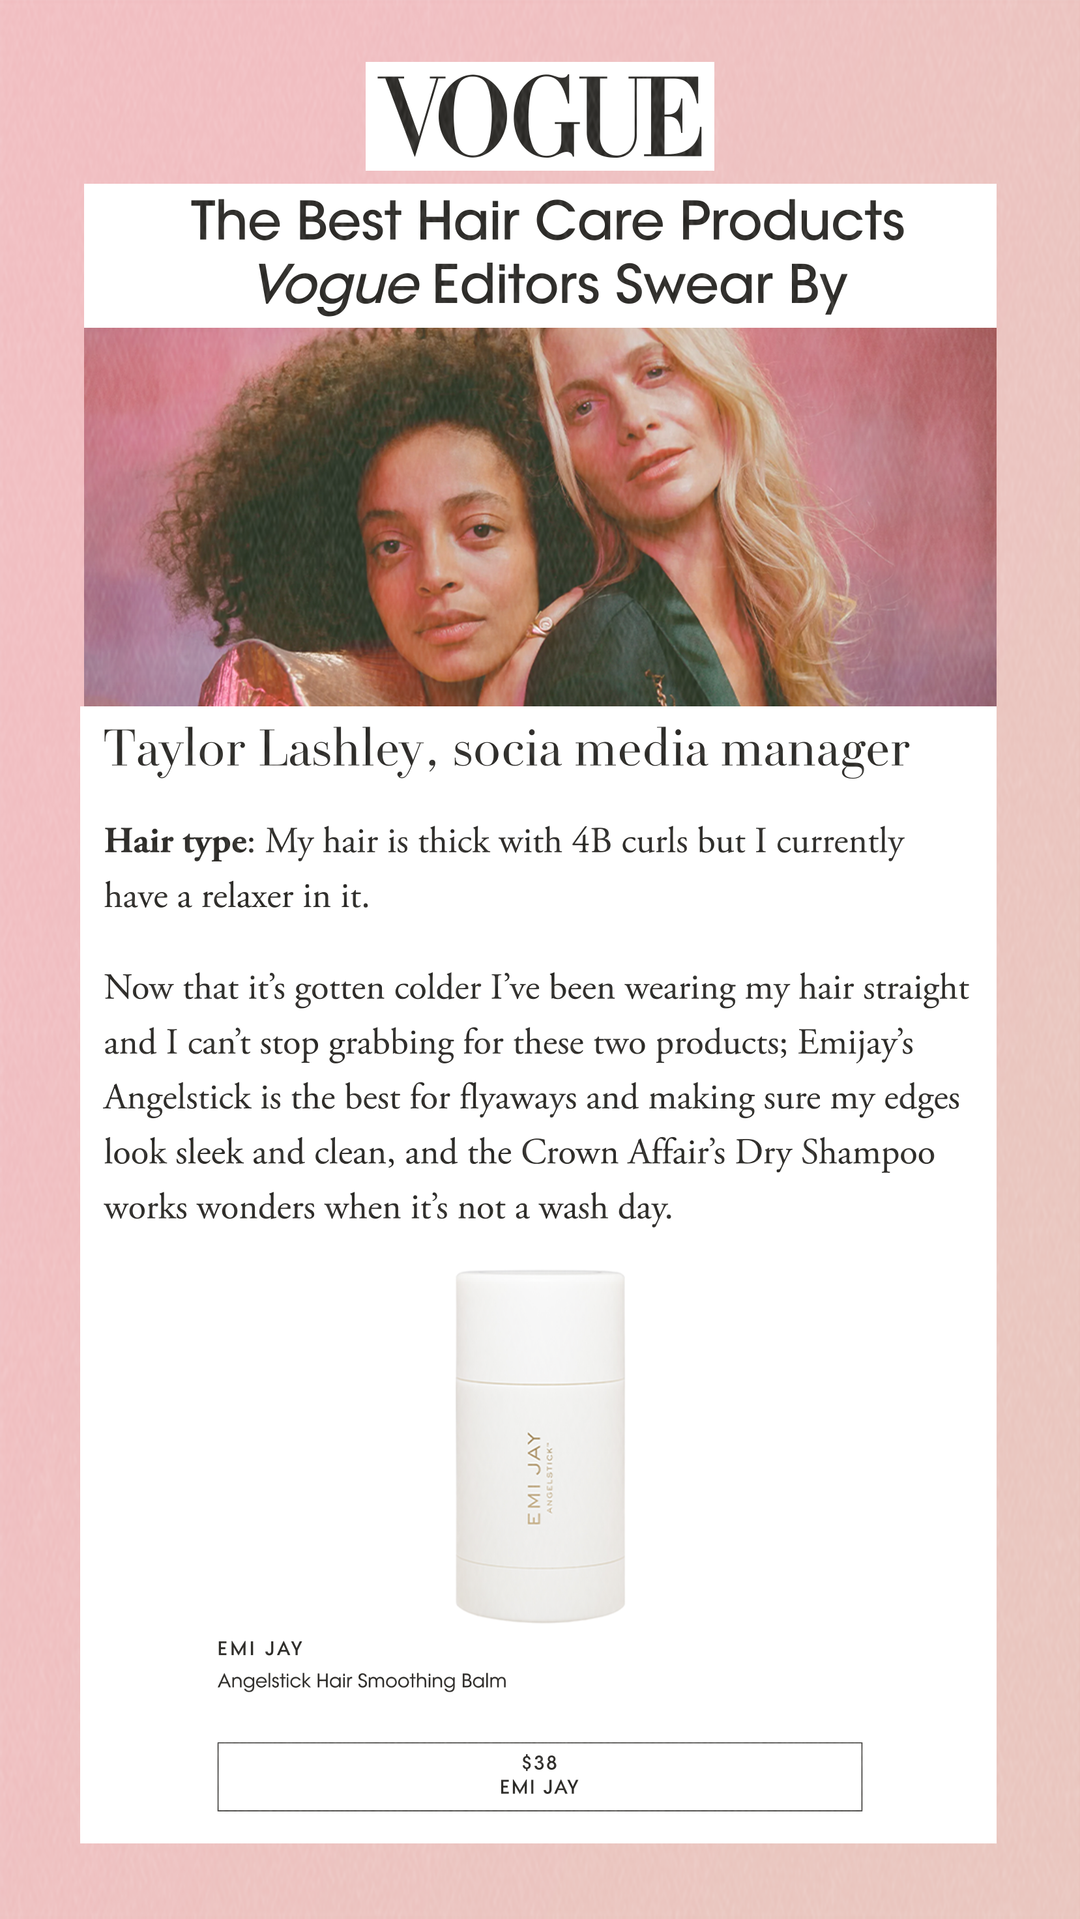 The Best Hair Care Products Vogue Editors Swear By Taylor Lashley, socia media managerHair type: My hair is thick with 4B curls but I currently have a relaxer in it.Now that it’s gotten colder I’ve been wearing my hair straight and I can’t stop grabbing for these two products; Emijay’s Angelstick is the best for flyaways and making sure my edges look sleek and clean, and the Crown Affair’s Dry Shampoo works wonders when it’s not a wash day. Emi JayAngelstick Hair Smoothing Balm$38EMI JAY